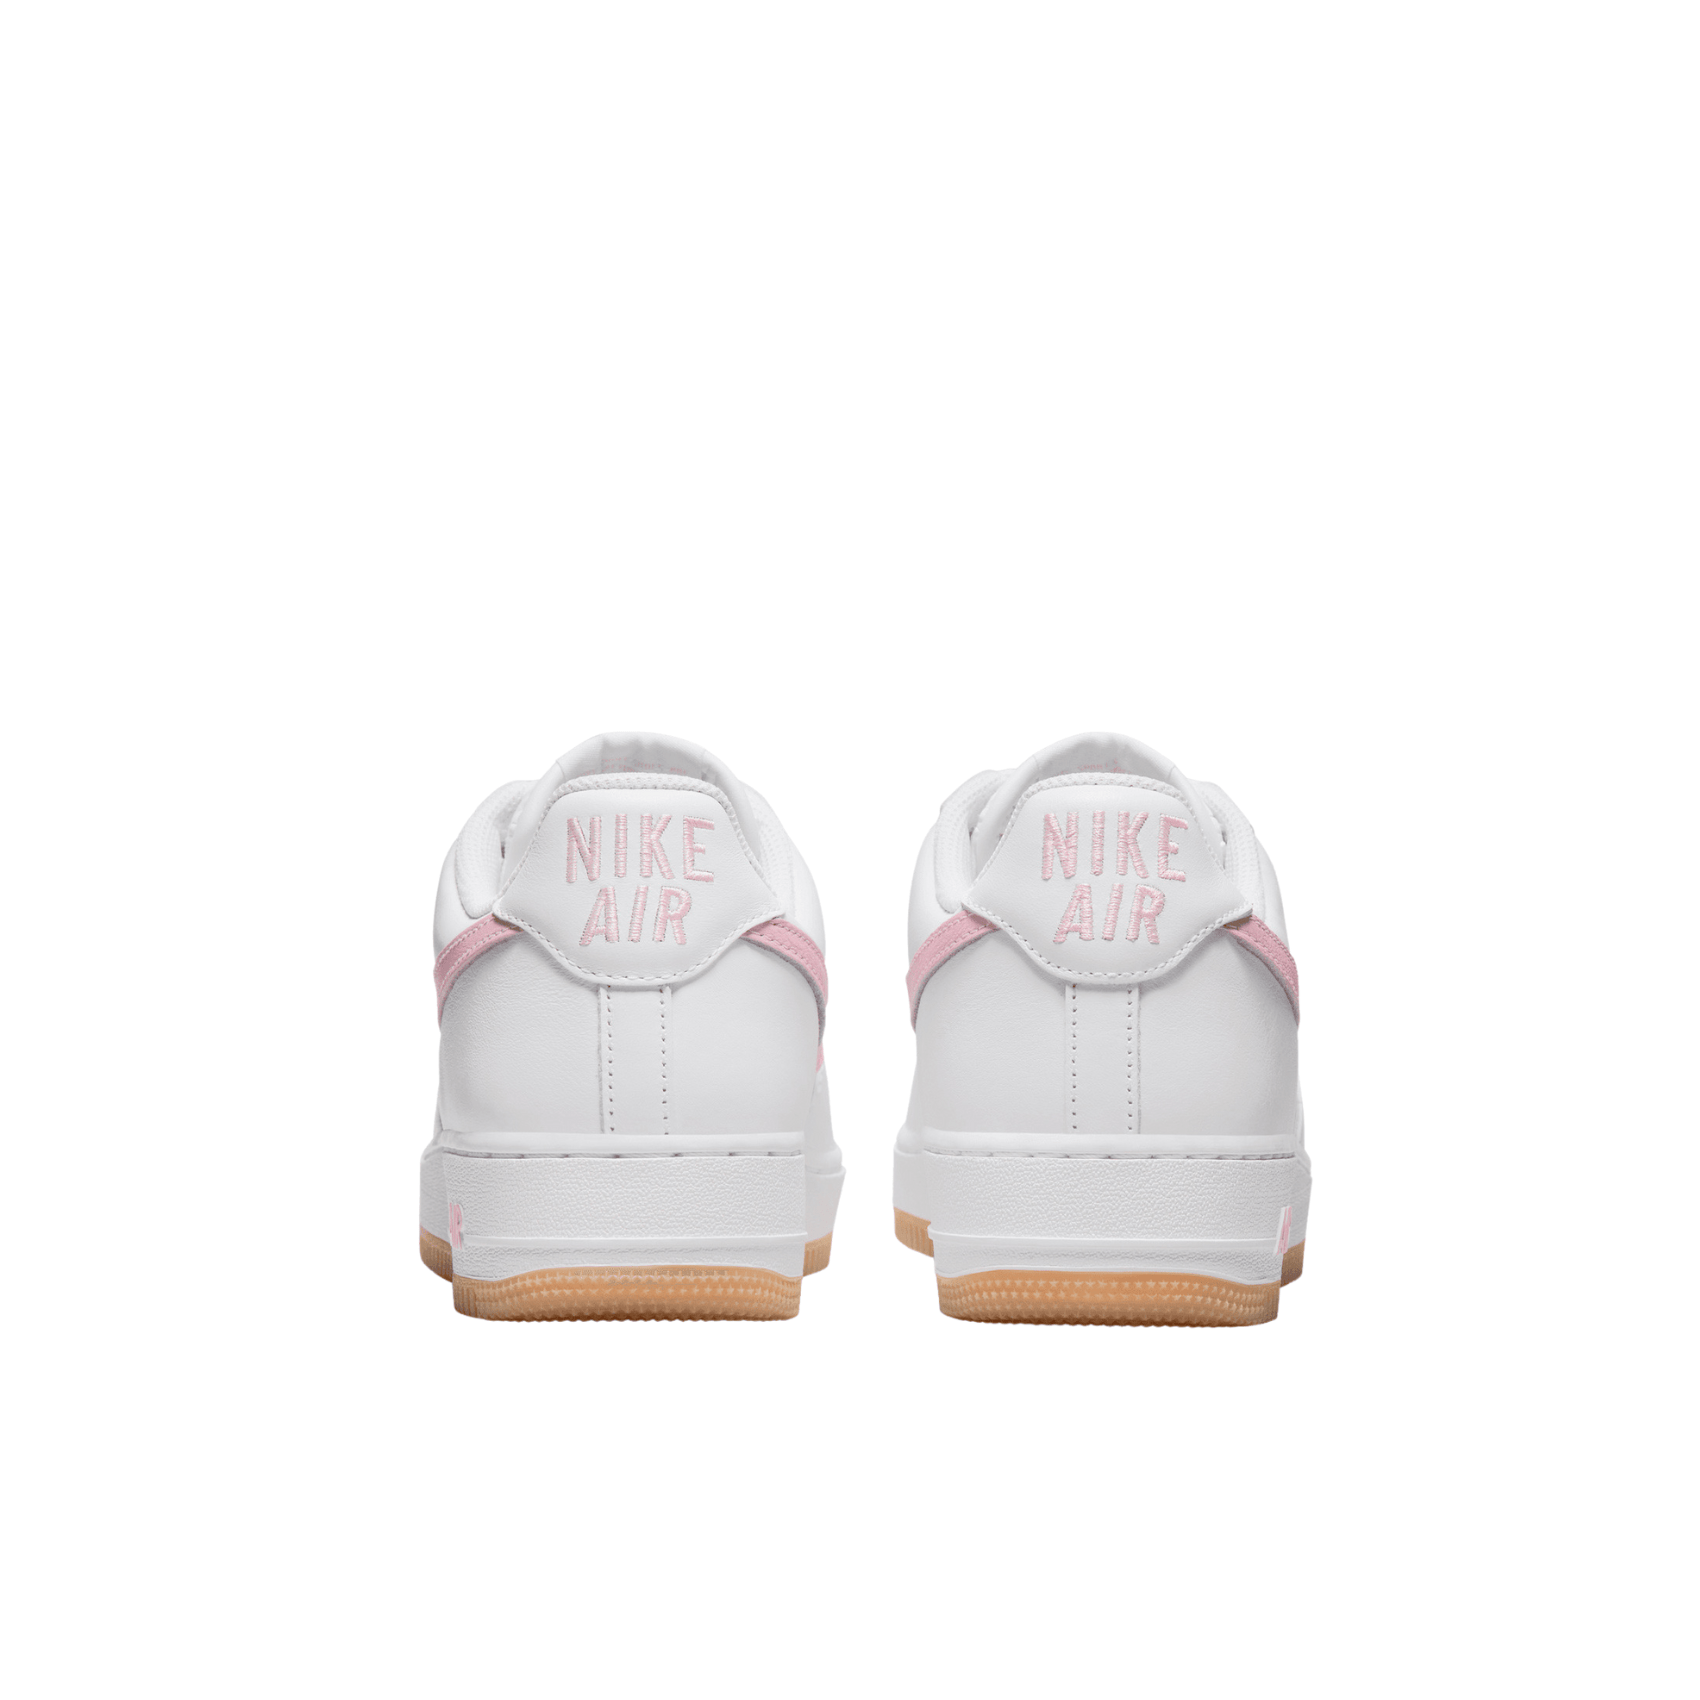 Air Force 1 Low Retro - White/Pink-Gum Yellow